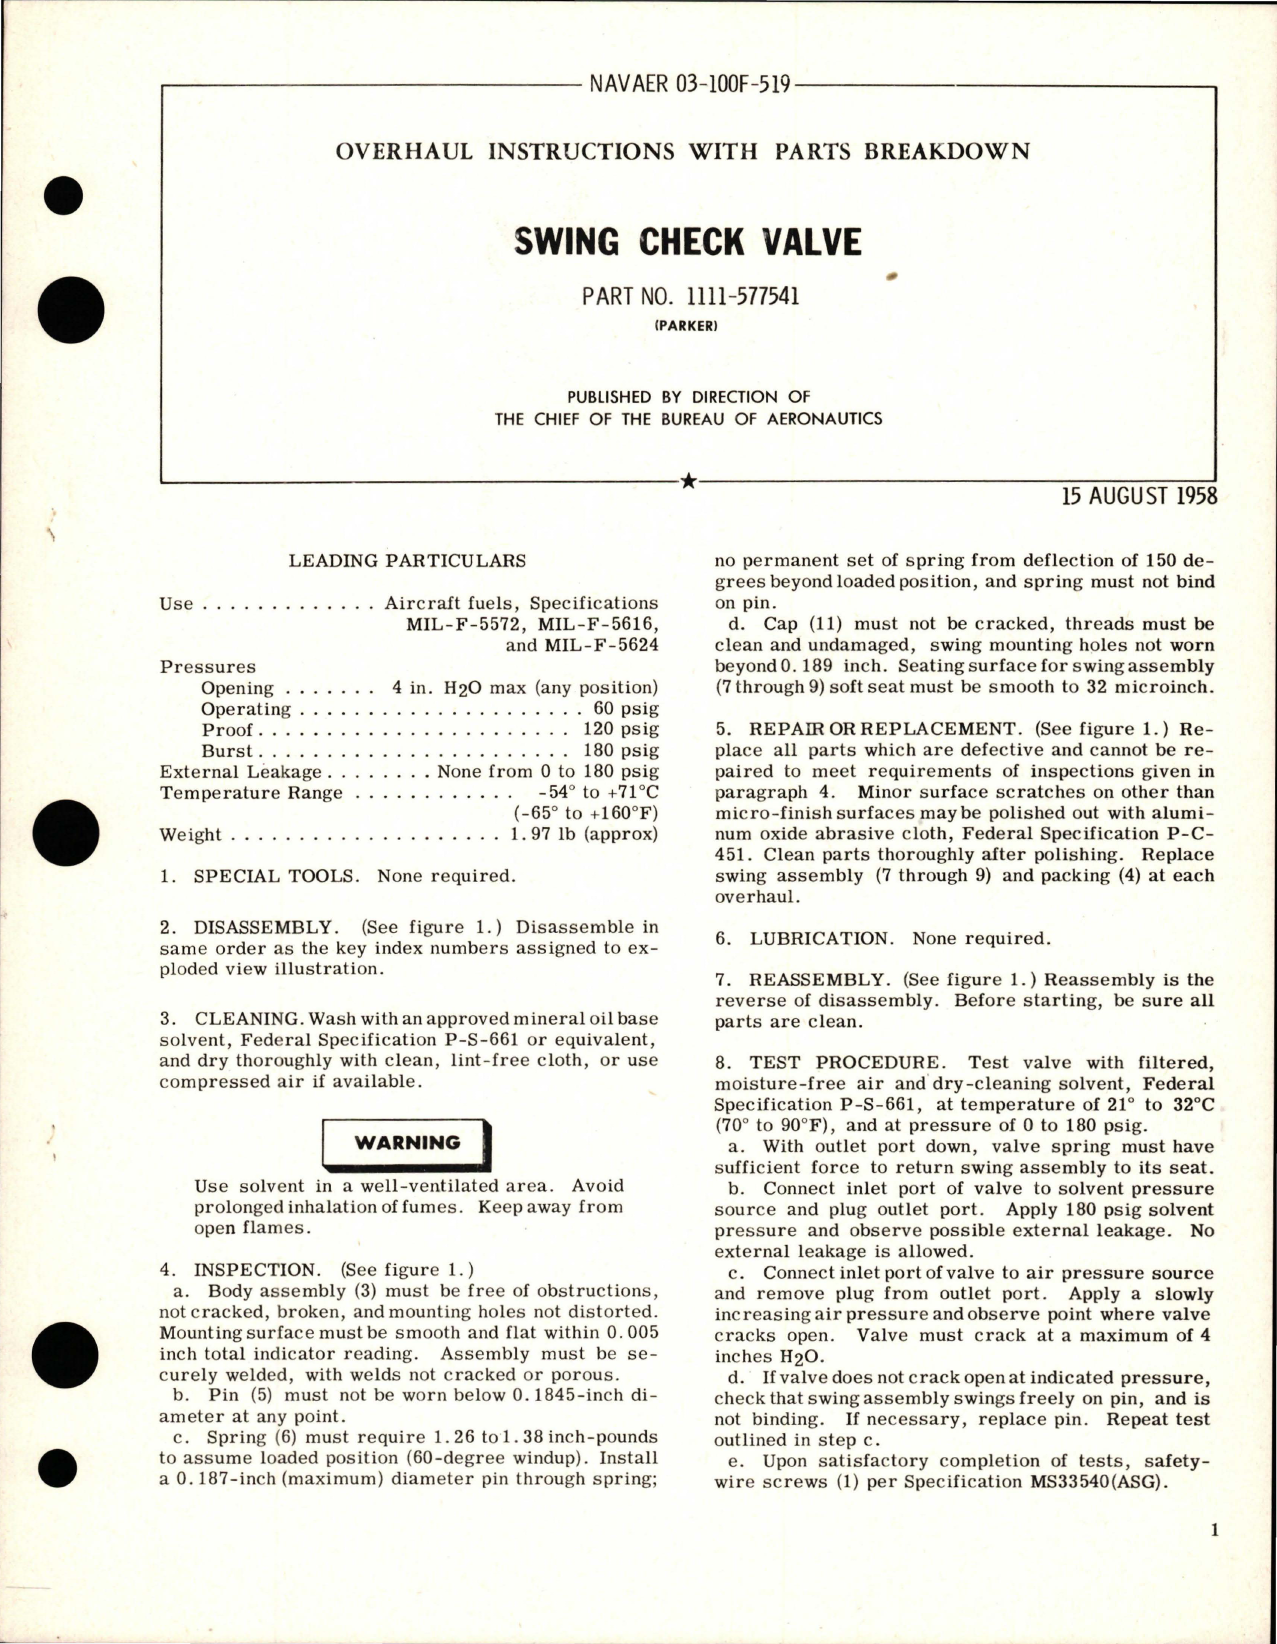 Sample page 1 from AirCorps Library document: Overhaul Instructions with Parts Breakdown for Swing Check Valve - Part 1111-577541